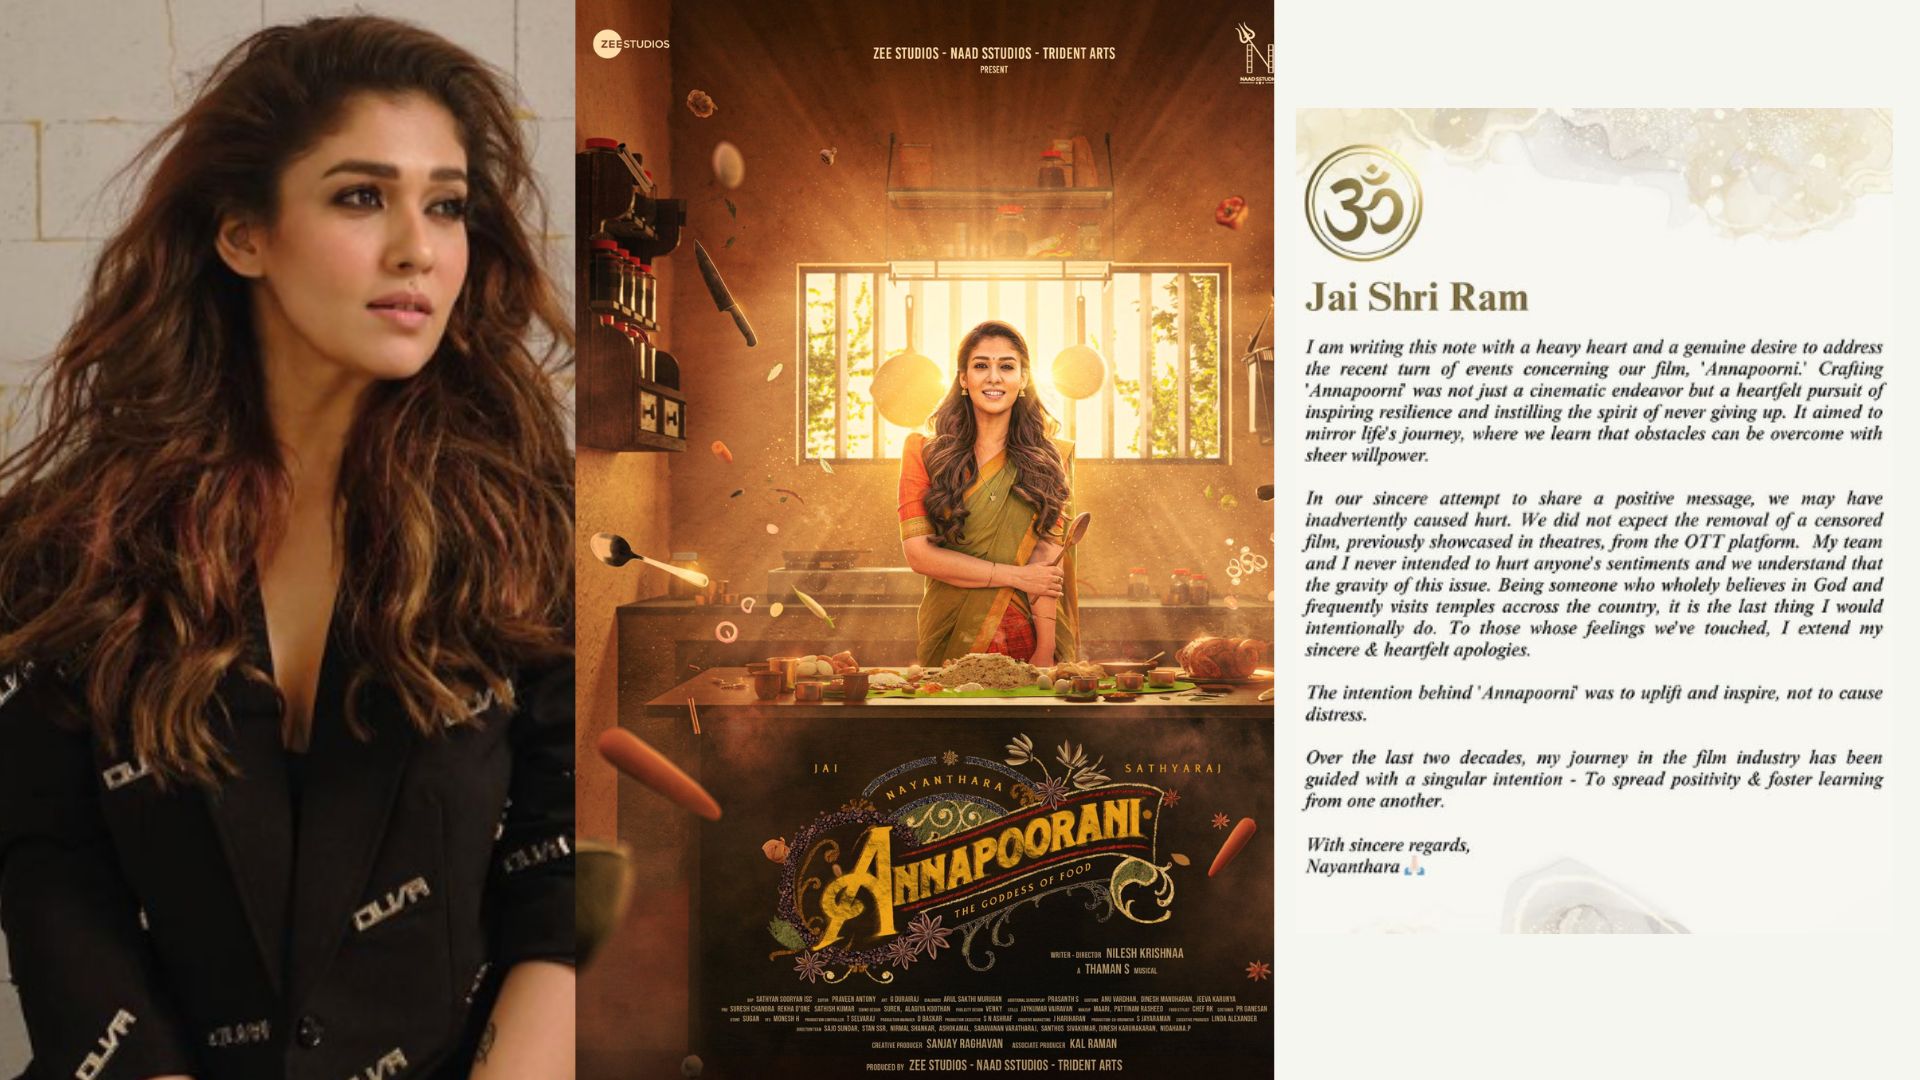 Actress Nayanthara Issues Apology Over ‘Annapoorani’; Addresses Allegations of Hurting Hindu Sentiments